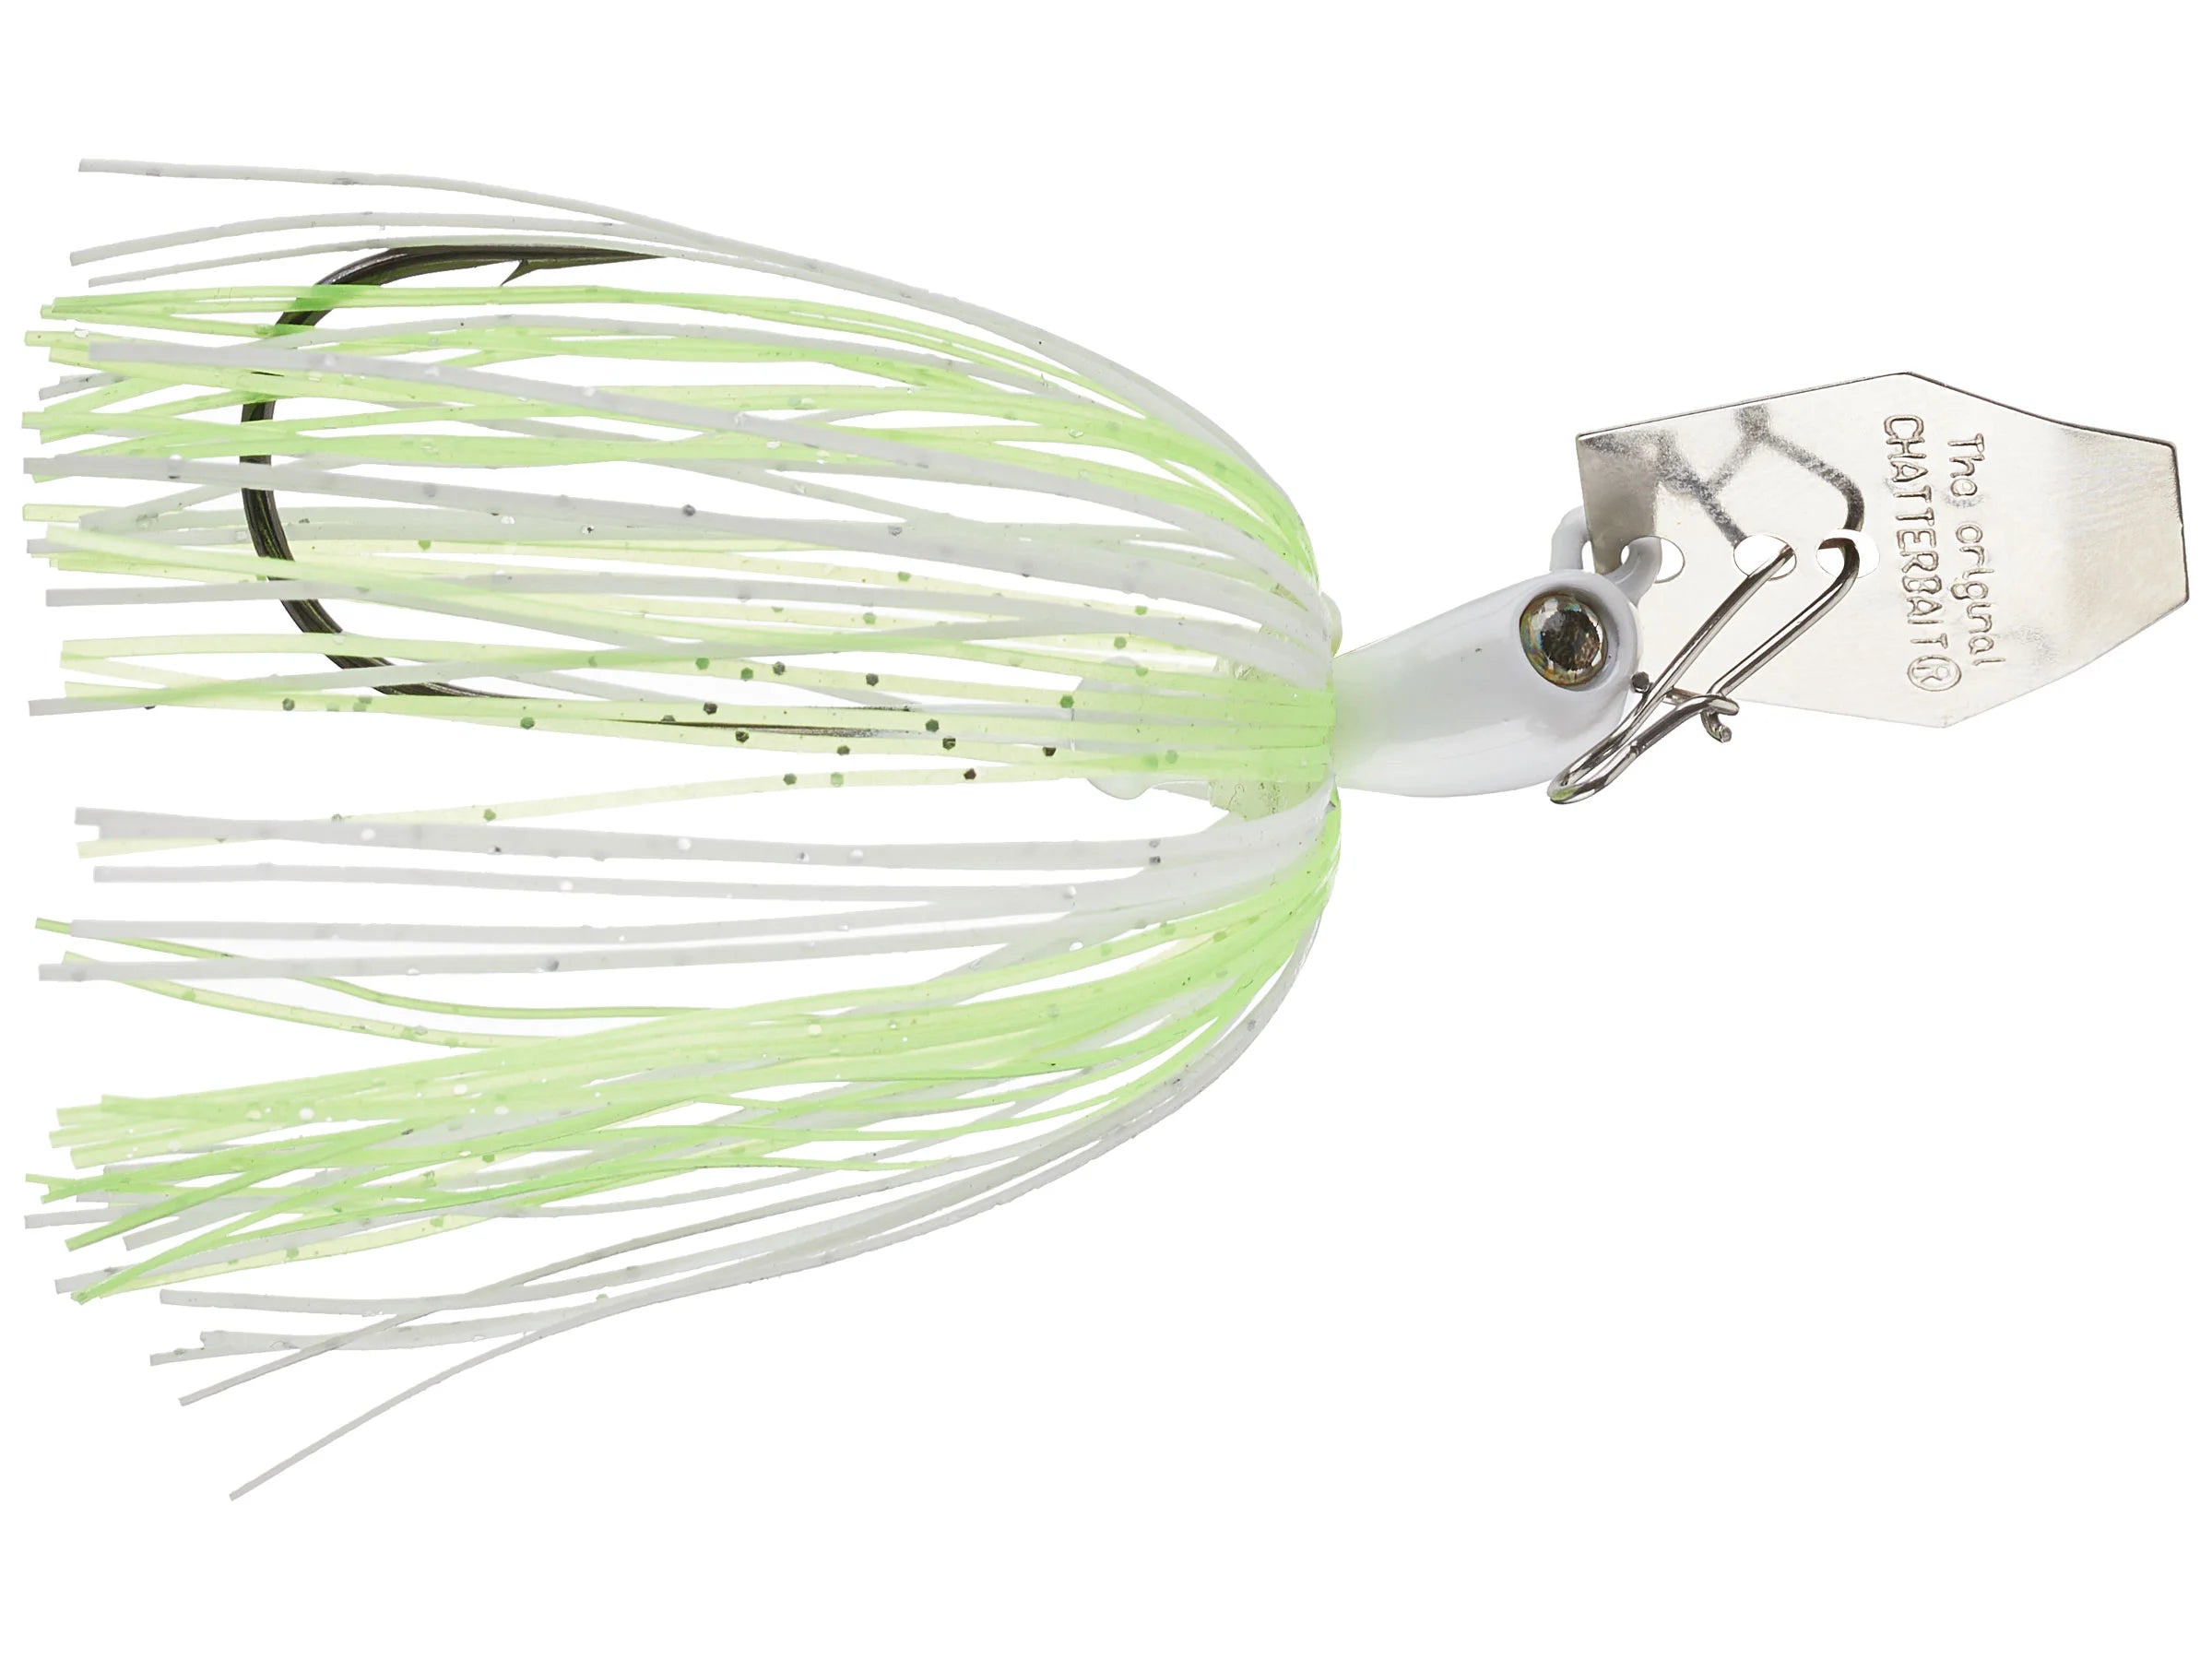 Z-Man Micro Chatterbait, Chartreuse White, 1/8-Ounce